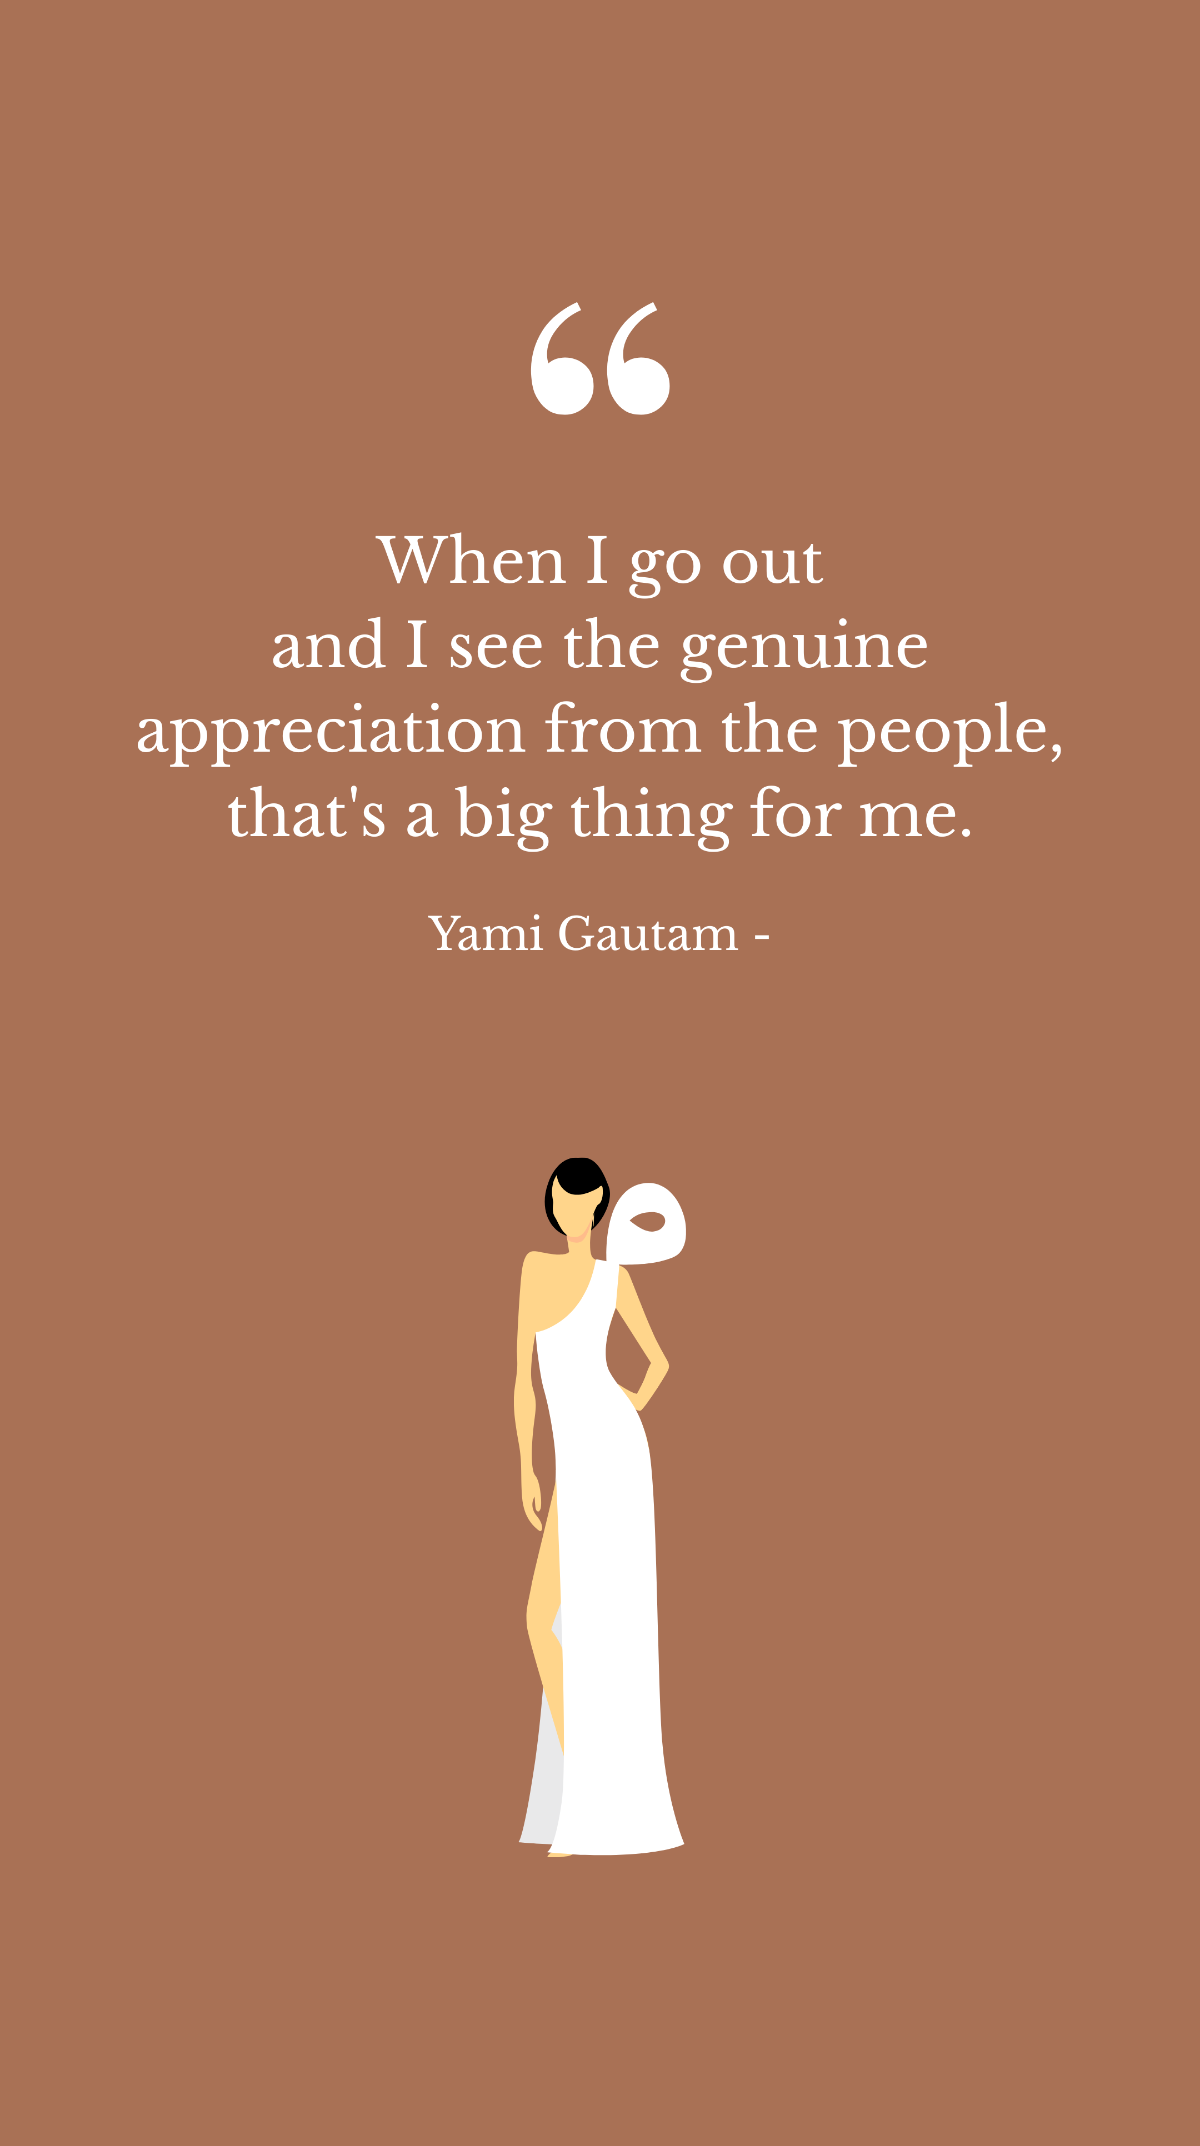 Yami Gautam - When I go out and I see the genuine appreciation from the people, that's a big thing for me. Template